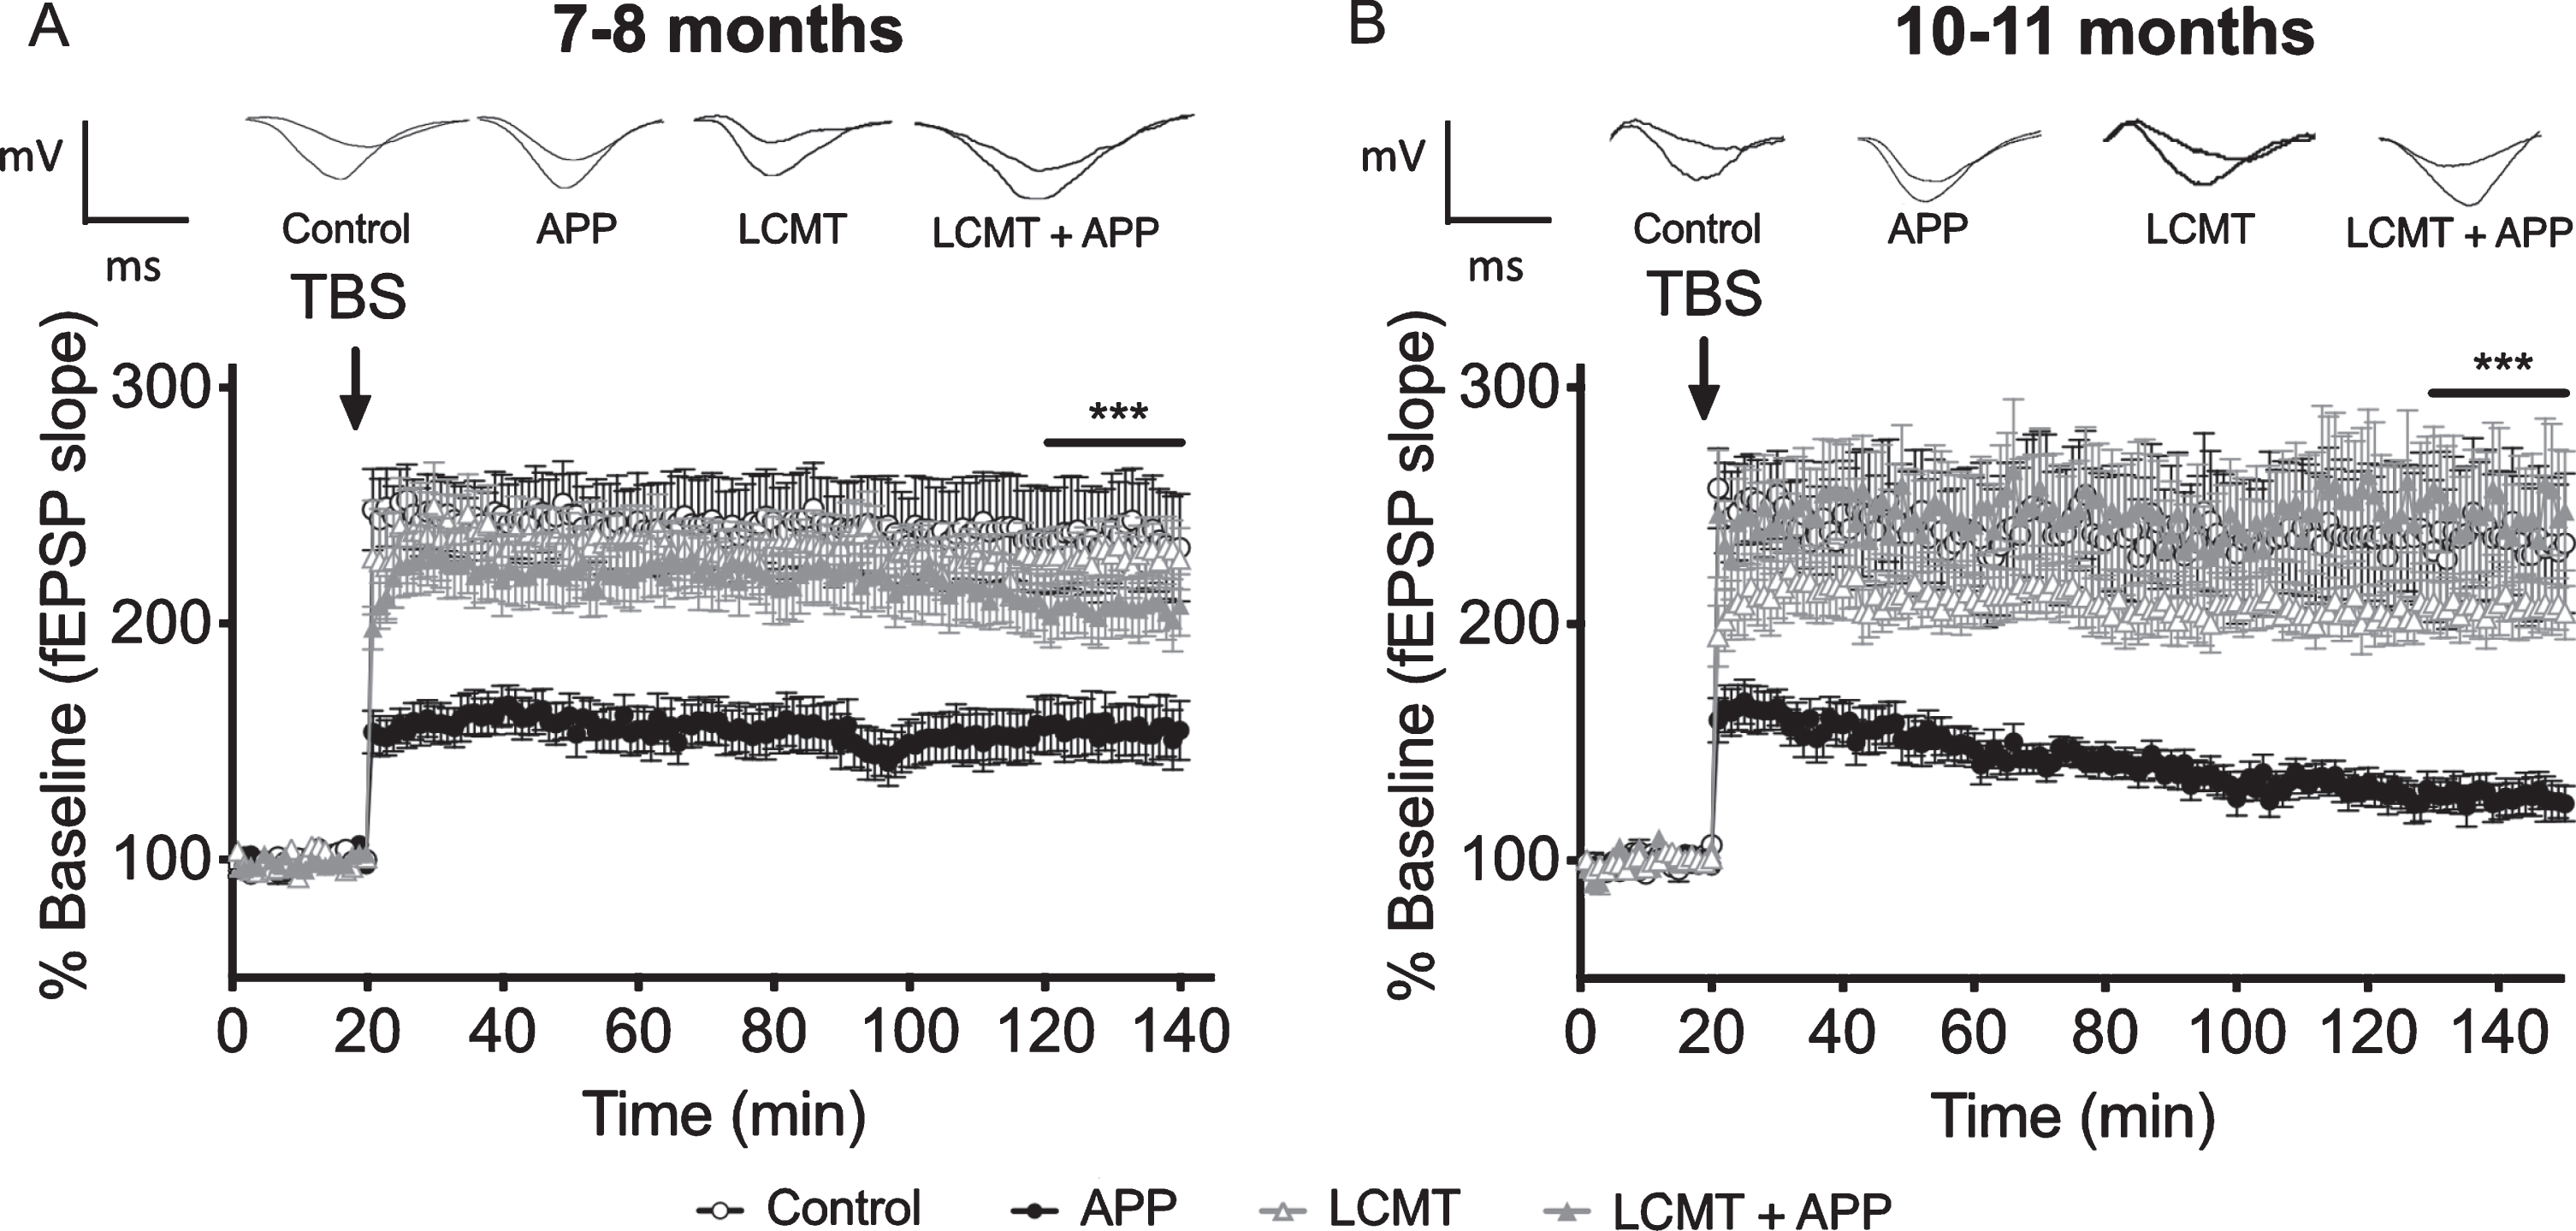 LCMT overexpression protects against electrophysiological impairments in Tg2576 mice. A) Time course of averaged Schaffer collateral fEPSP responses (±SEM) prior to and following delivery of theta-burst stimulation (arrow) in hippocampal slices prepared from 7-8-month-old mice that carried the Tg2576 APP transgene in combination with transgenic LCMT overexpression (LCMT + APP), or 7-8-month-old animals that carried the Tg2576 APP transgene alone (APP), overexpressed LCMT alone (LCMT), or controls. 2-way RM ANOVA for fEPSP responses over the last 20 min of recording with group and time as factors shows a significant effect of group (horizontal bar; F(3, 60) = 5.297, p = 0.0026). Dunnett’s multiple comparisons show that the APP group was significantly different from each of the other three groups (p = 0.0481 for LCMT + APP, p = 0.0033 for LCMT and p = 0.0019 for control). N = 14 control, 13 APP, 18 LCMT, 19 LCMT + APP. Representative traces of field potential responses prior to TBS, and during the last 20 min of recording are shown above for each of the indicated genotypes. B) Time course of averaged Schaffer collateral fEPSP responses (±SEM) prior to and following delivery of theta-burst stimulation (arrow) in hippocampal slices prepared from 10-11-month-old mice that carried the Tg2576 APP transgene in combination with transgenic LCMT overexpression (LCMT + APP), or 10-11-month-old animals that carried the Tg2576 APP transgene alone (APP), overexpressed LCMT alone (LCMT), or controls. 2-way RM ANOVA for fEPSP responses over the last 20 min of recording with group and time as factors shows a significant effect of group (horizontal bar; F(3, 43) = 7.328, p = 0.0004). Dunnett’s multiple comparisons show that the APP group was significantly different from each of the other three groups (p = 0.0003 for LCMT + APP, p = 0.0183 for LCMT and p = 0.0013 for control). N = 11 control, 12 APP, 12 LCMT, 12 LCMT + APP. Representative traces of field potential responses prior to TBS, and during the last 20 min of recording are shown above for each of the indicated genotypes.